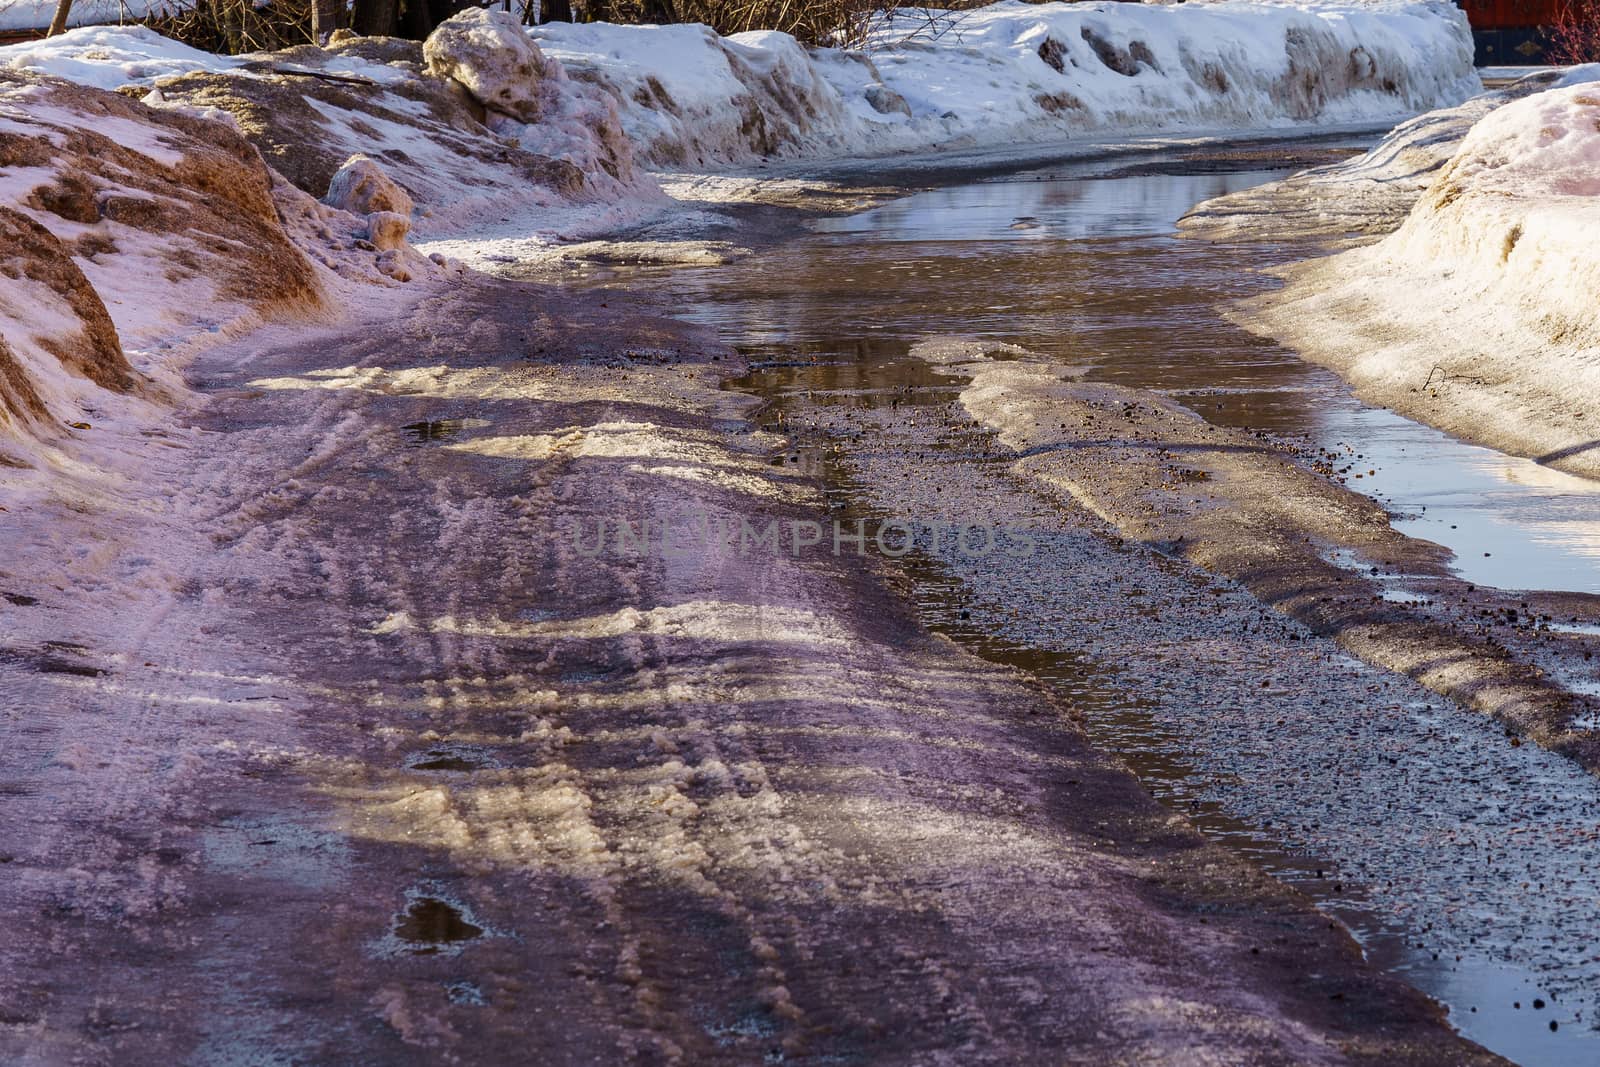 winter road covered with snow and ice with puddles and ruts, sunny day